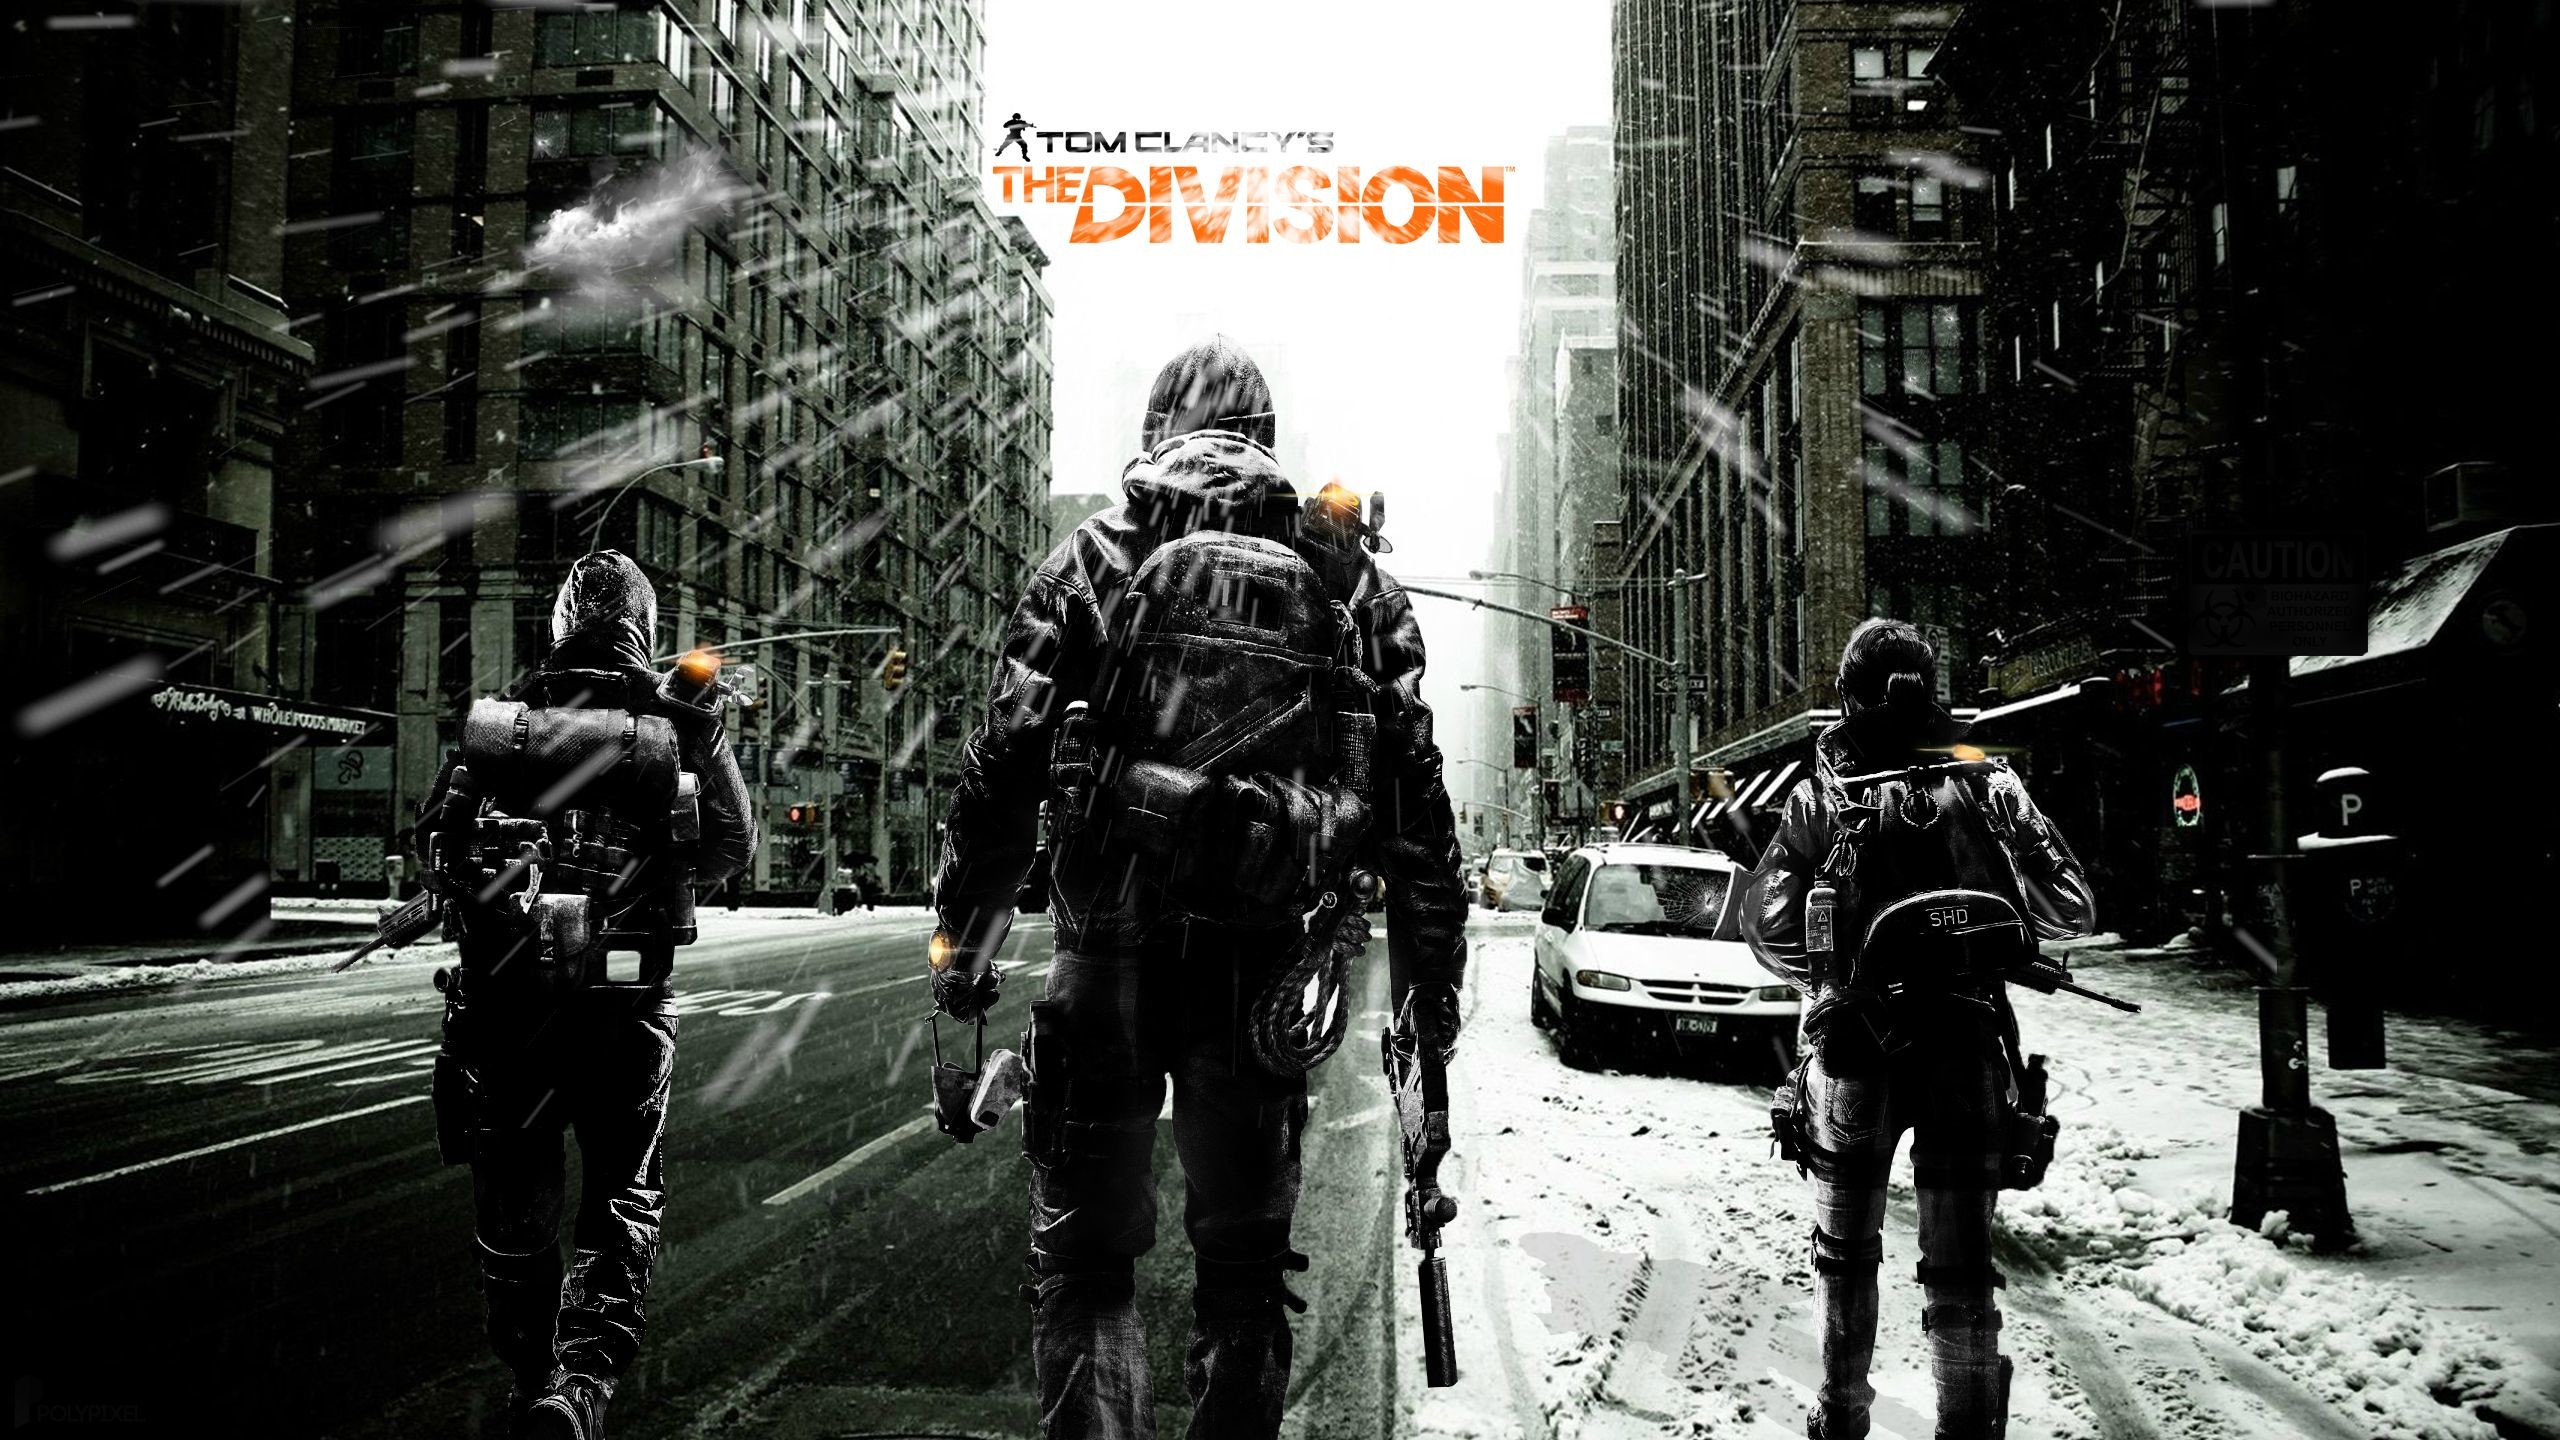 2560x1440 The Division Video Game Wallpaper The Division Wallpaper 1080p